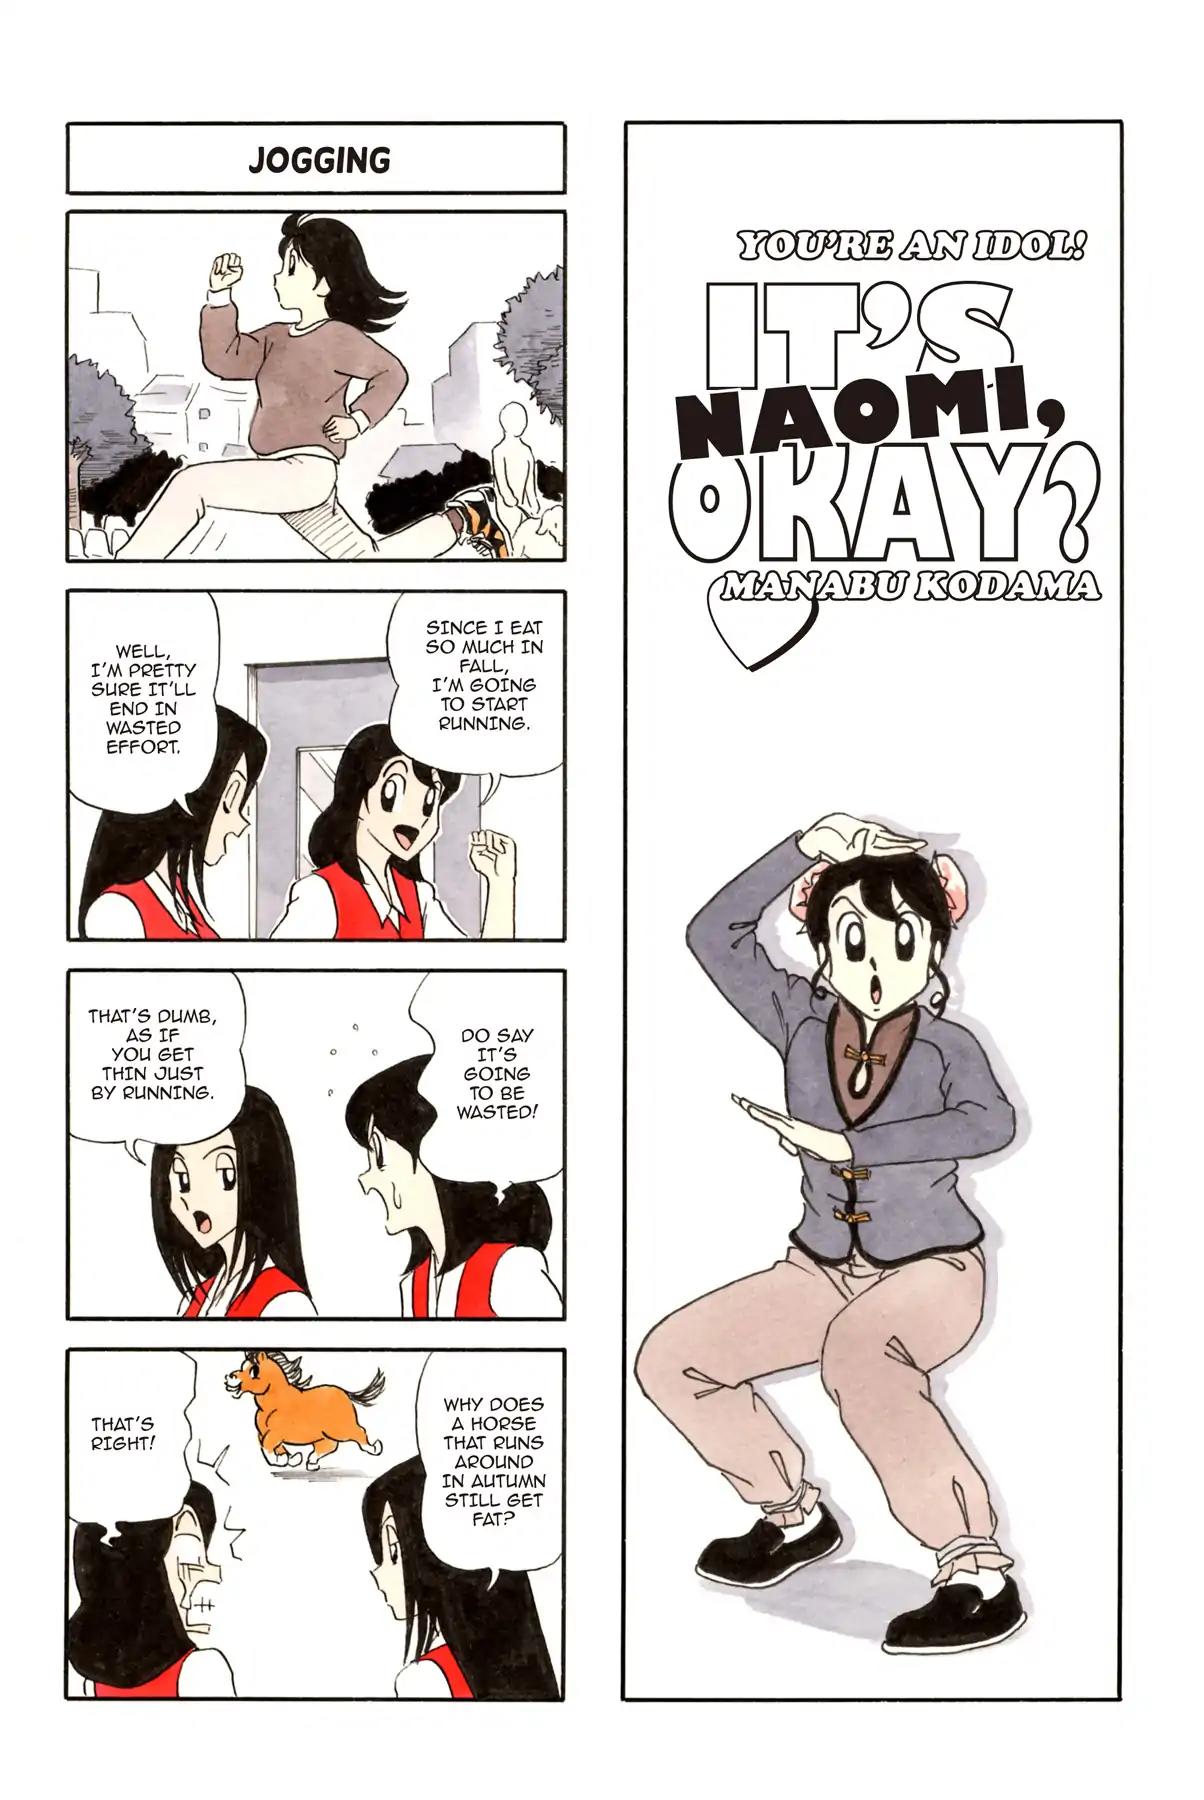 It's Naomi, Okay? After 16 Vol 1 Chapter 22